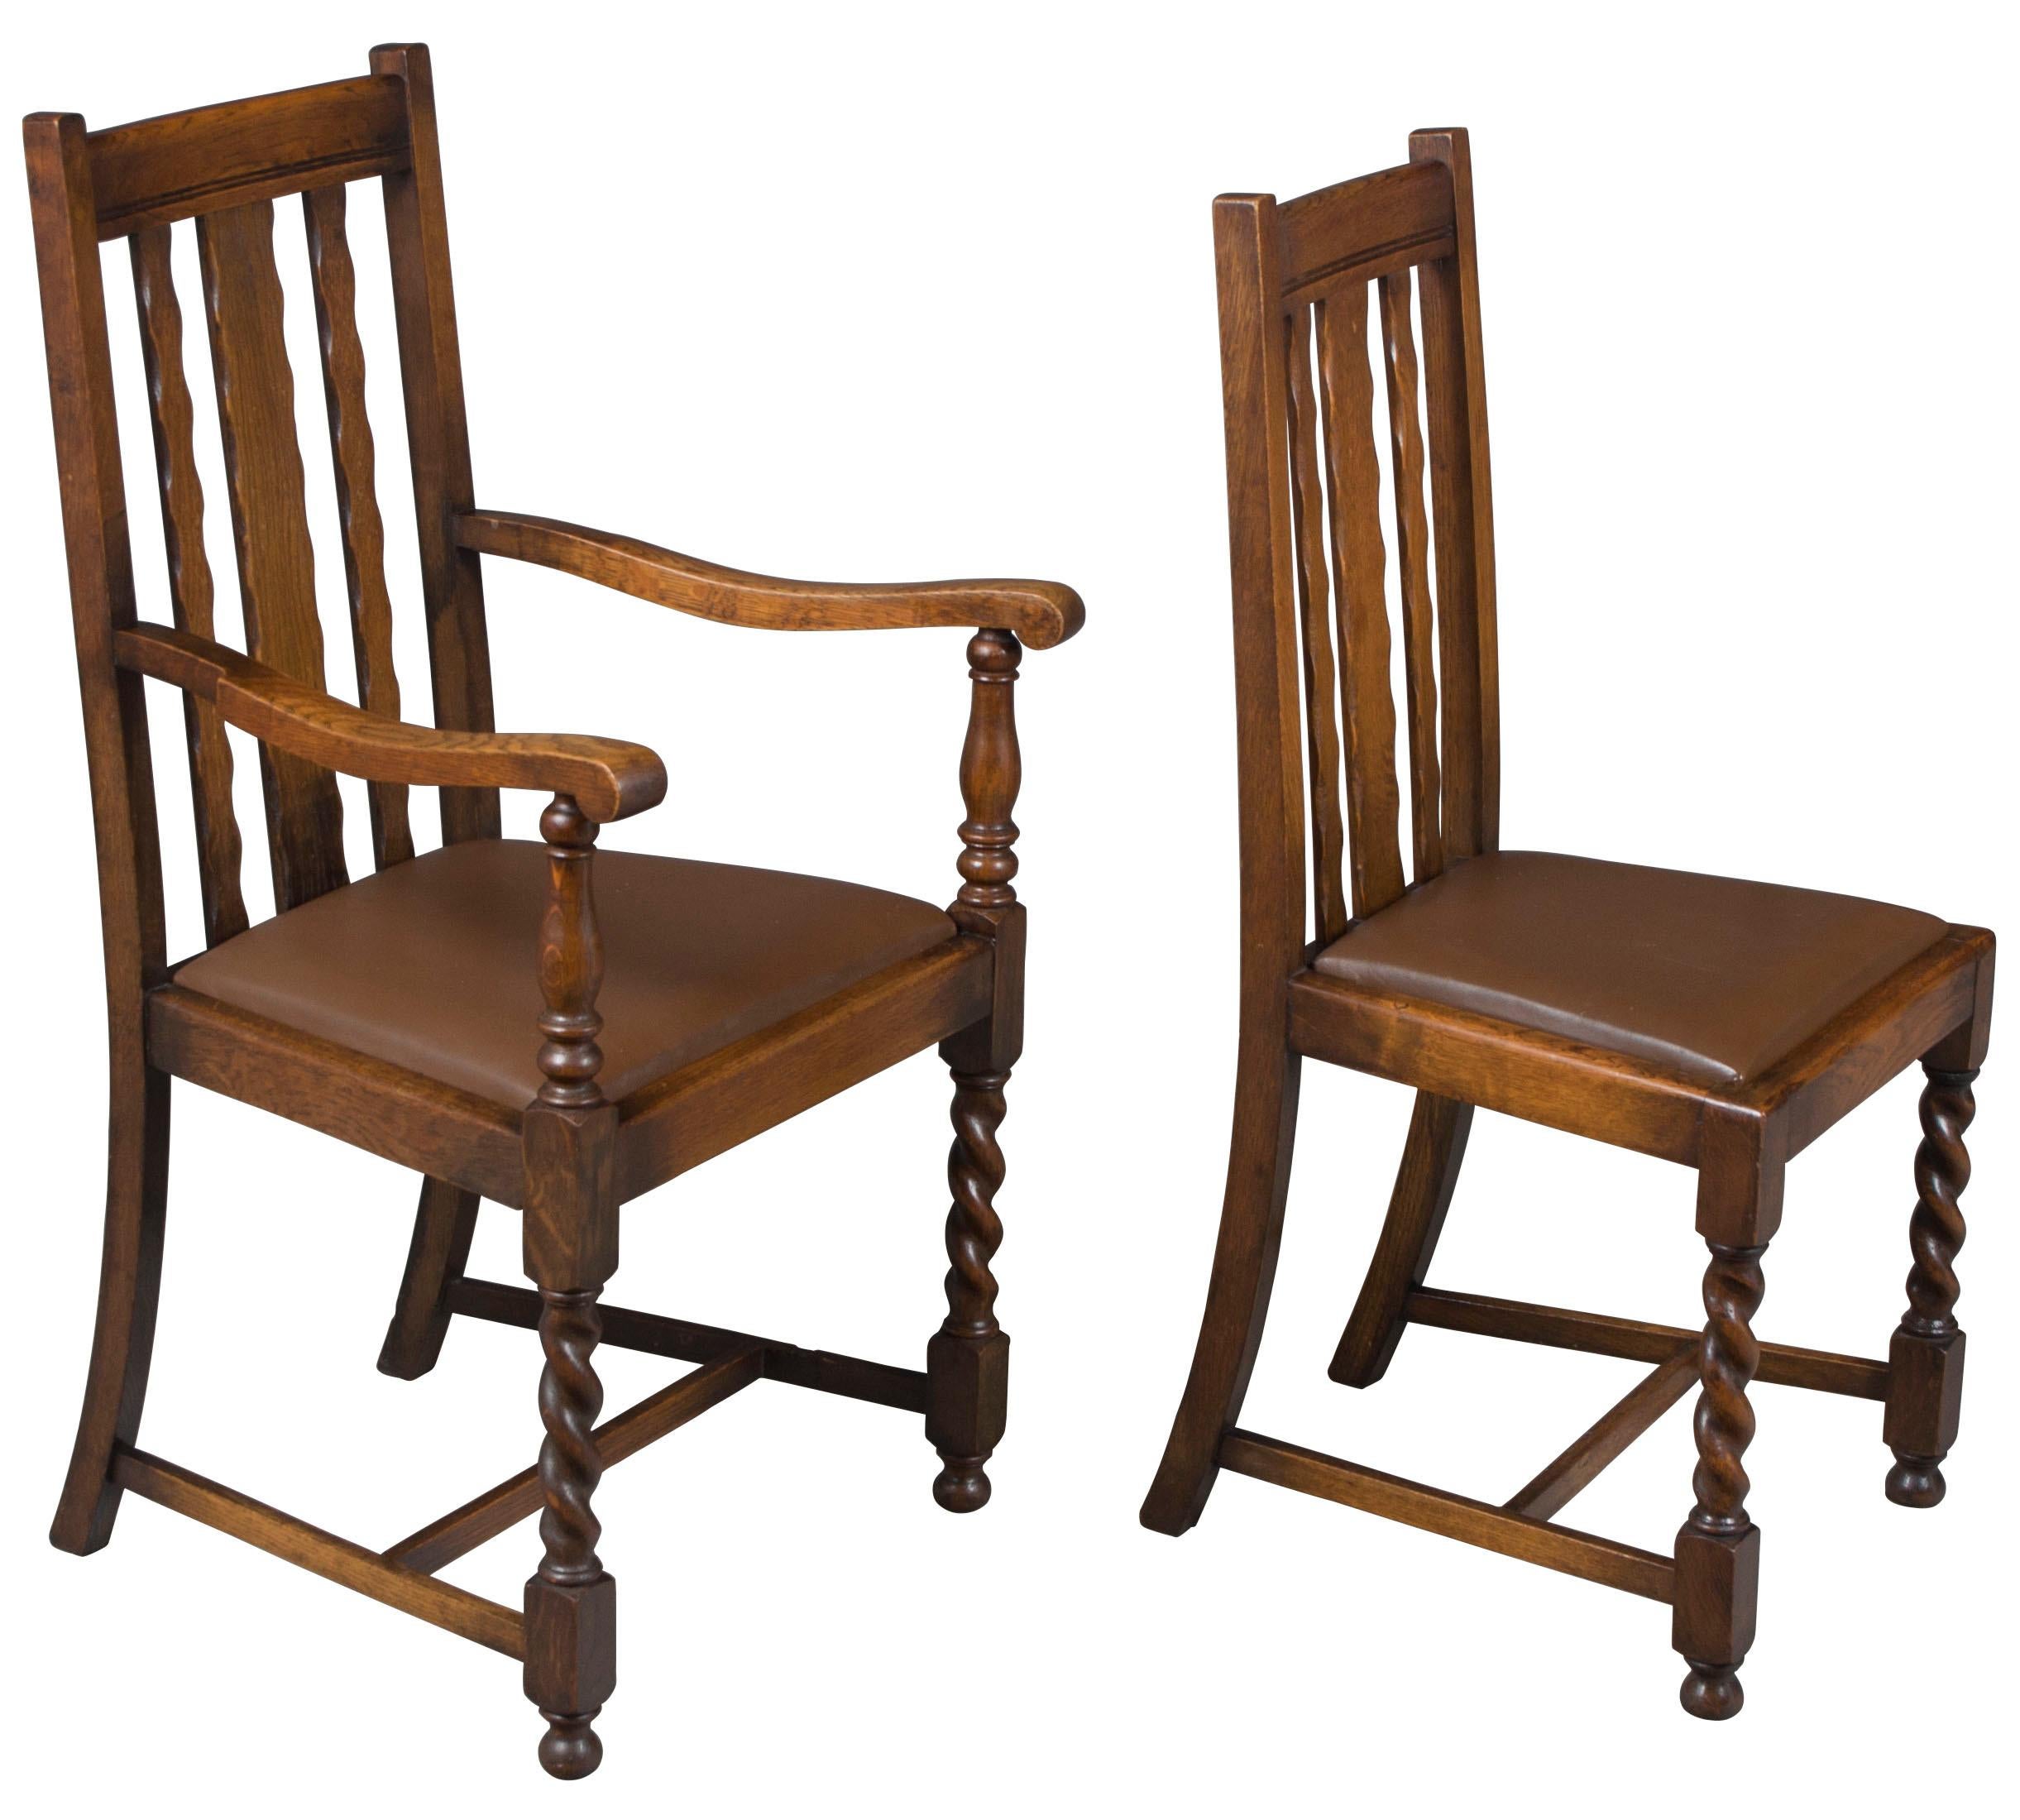 Jacobean Set of Four Oak Barley Twist Dining Room or Kitchen Chairs